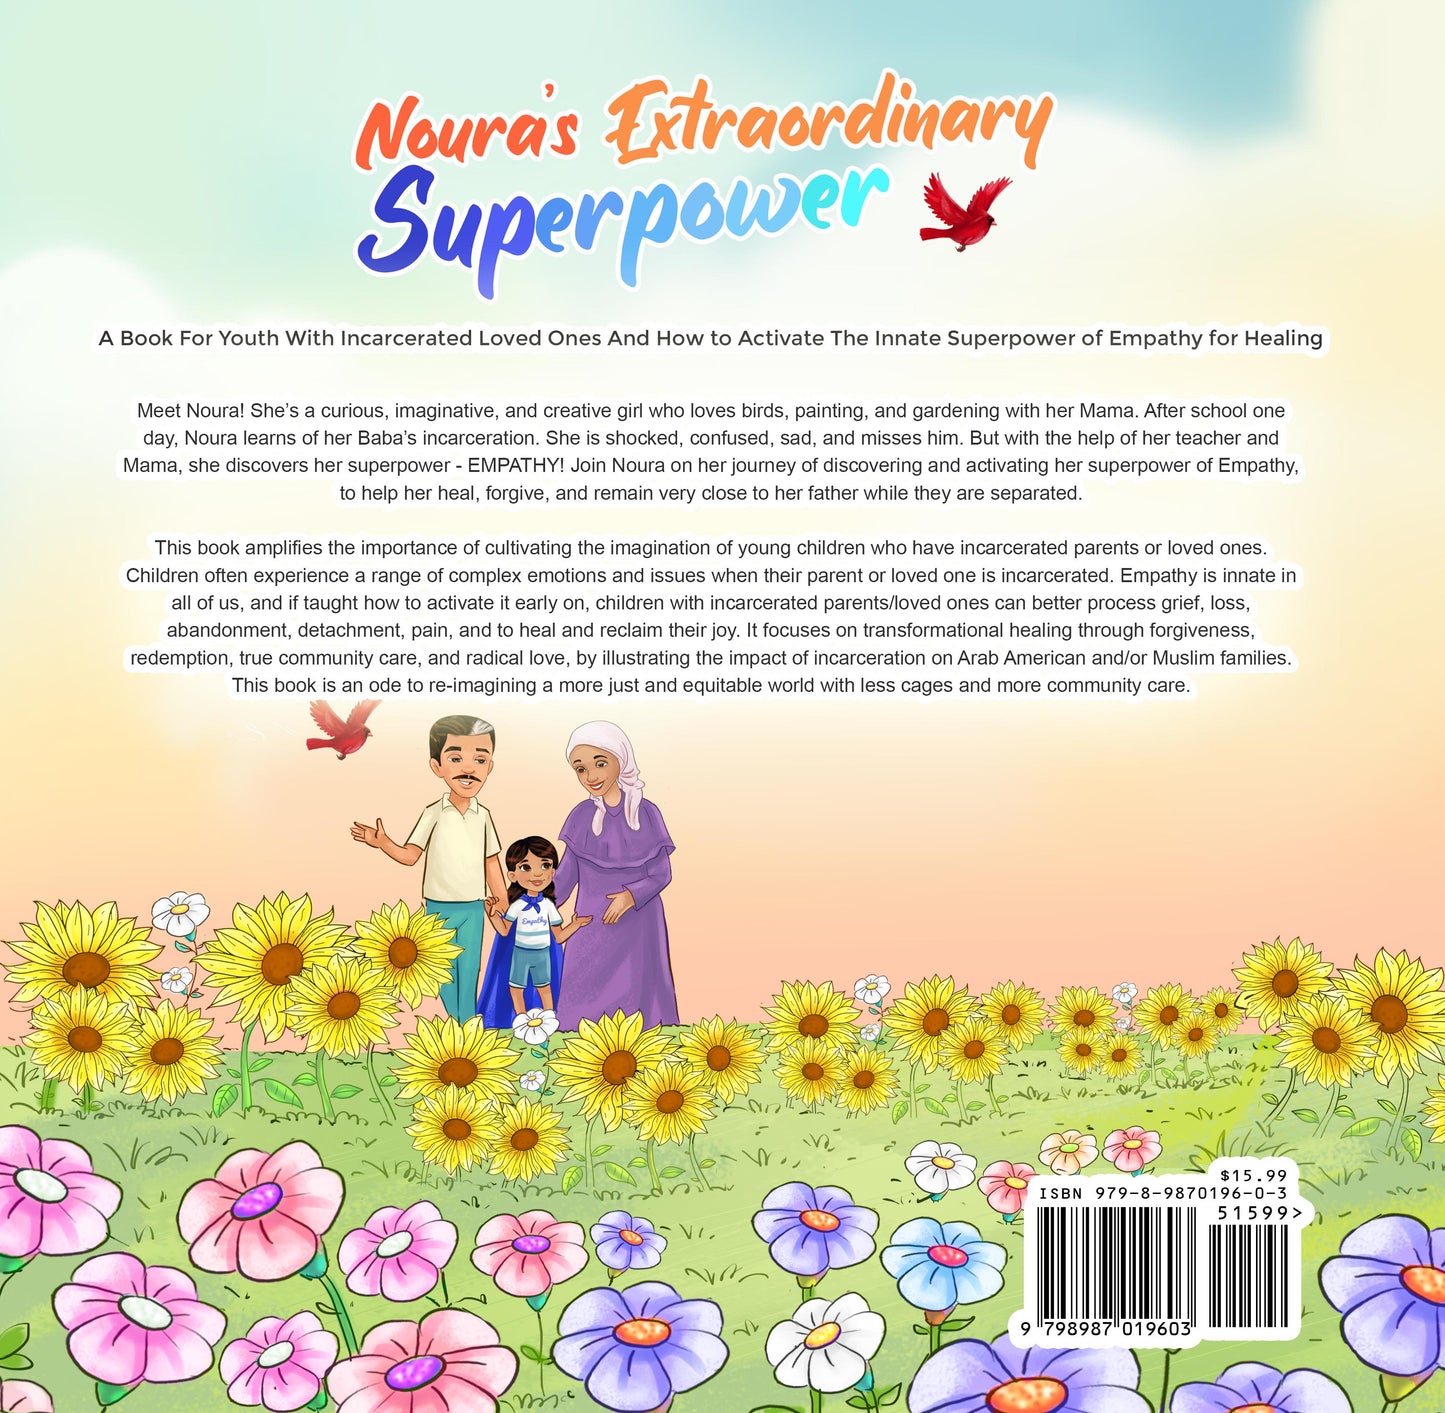 Noura's Extraordinary Superpower! A Book For Youth With Incarcerated Loved Ones And How To Activate The Innate Superpower Of Empathy For Healing